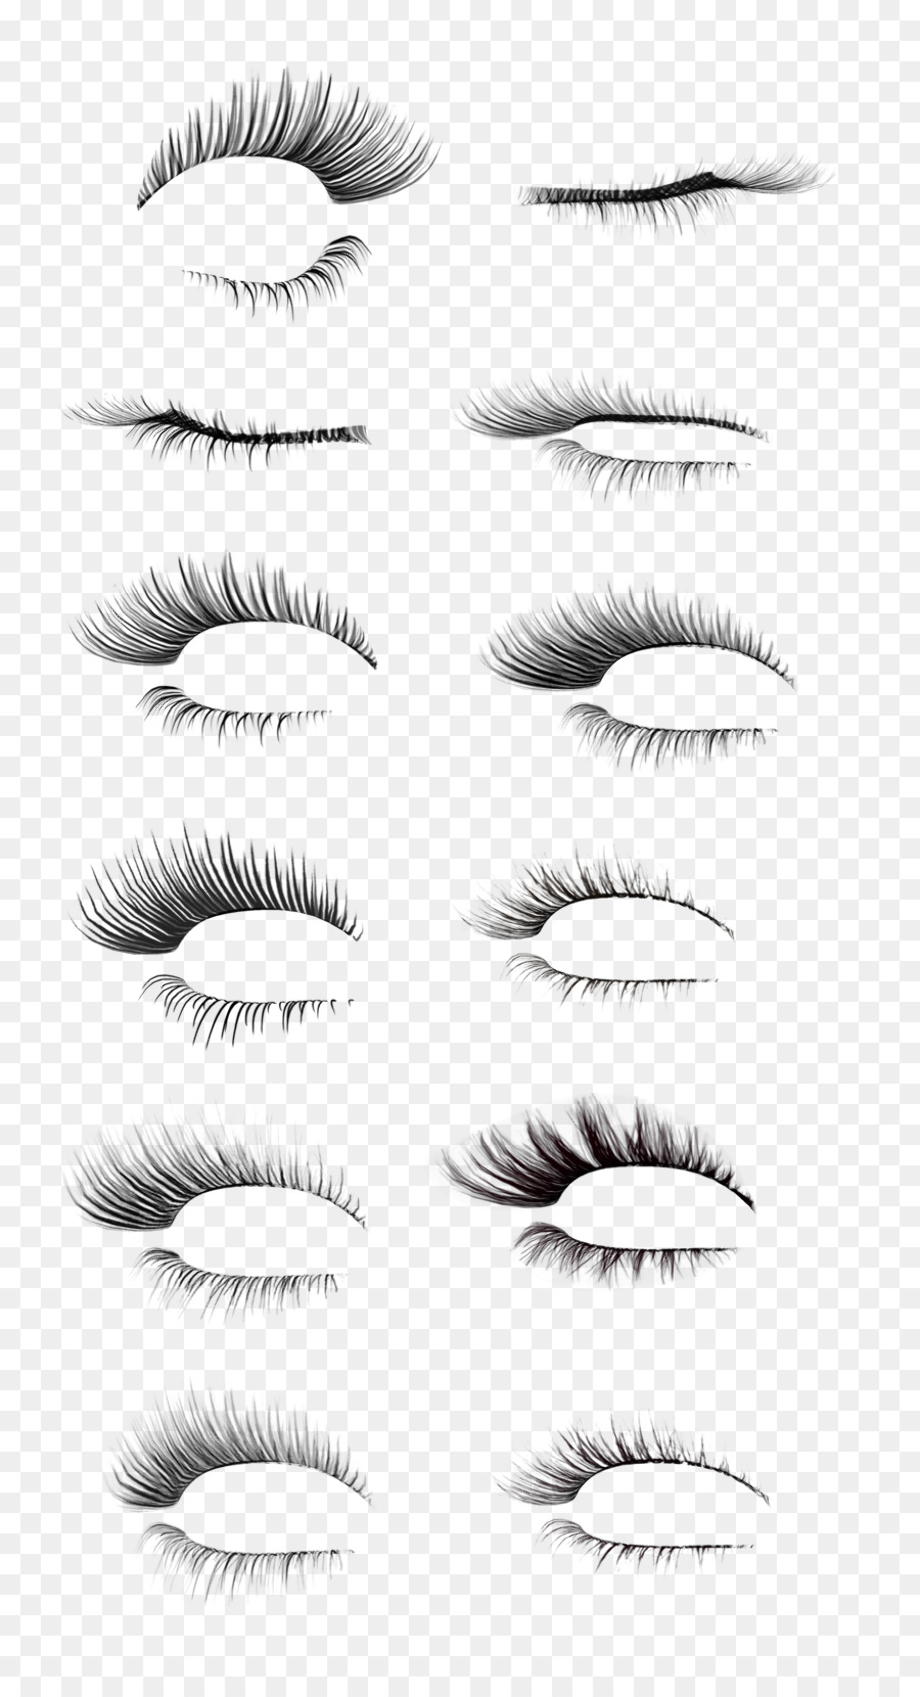  How To Draw Realistic Eyelashes  The ultimate guide 